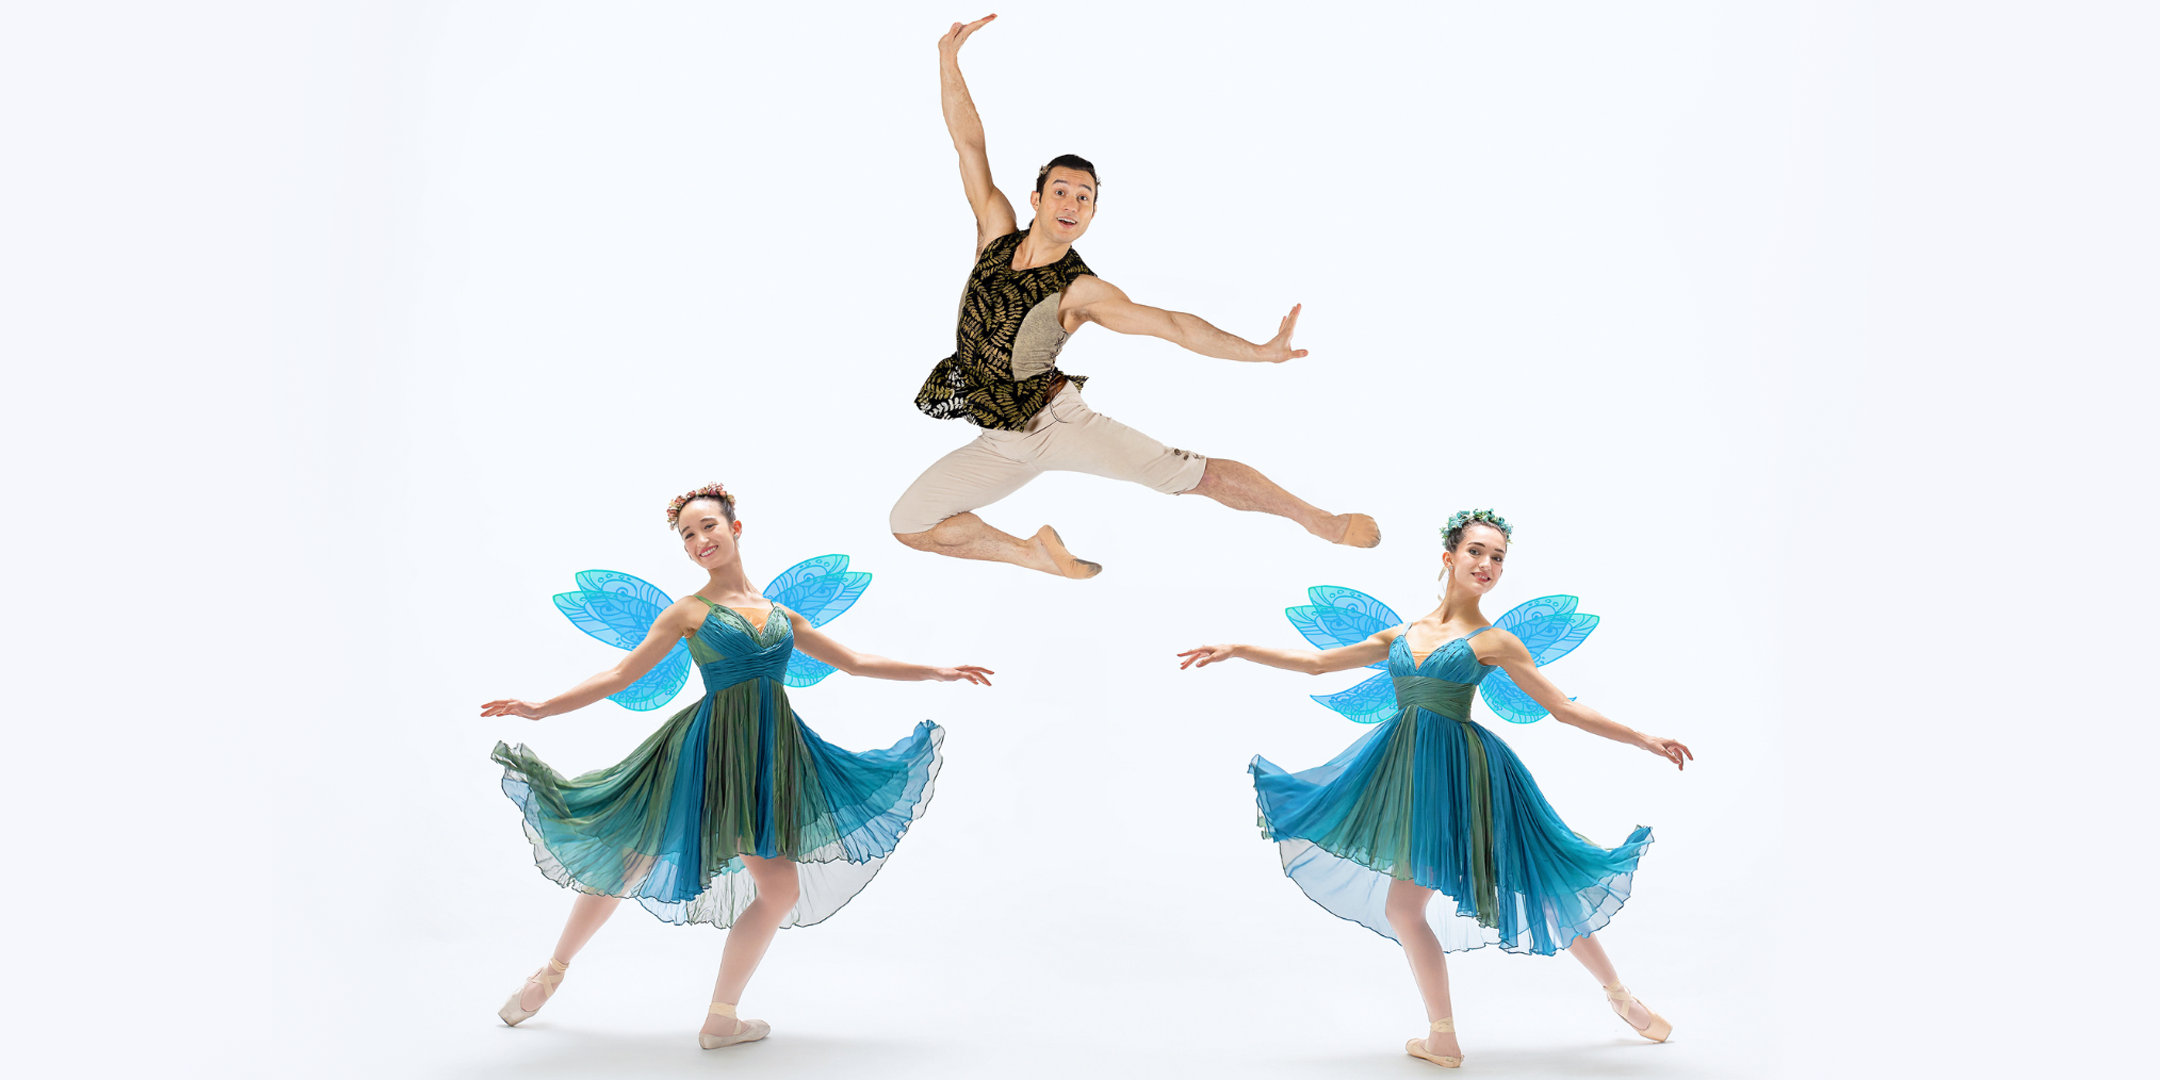 In front of a blank white background, two female dancers dressed as fairies and one male dancer pose for a photo. The fairies, wearing blue and green dresses with blue wings, pose in tendu efface derriere, mirroring each other. The male dancer wears a brown vest and tan tights, leaping in a stylized Italian pas de chat.